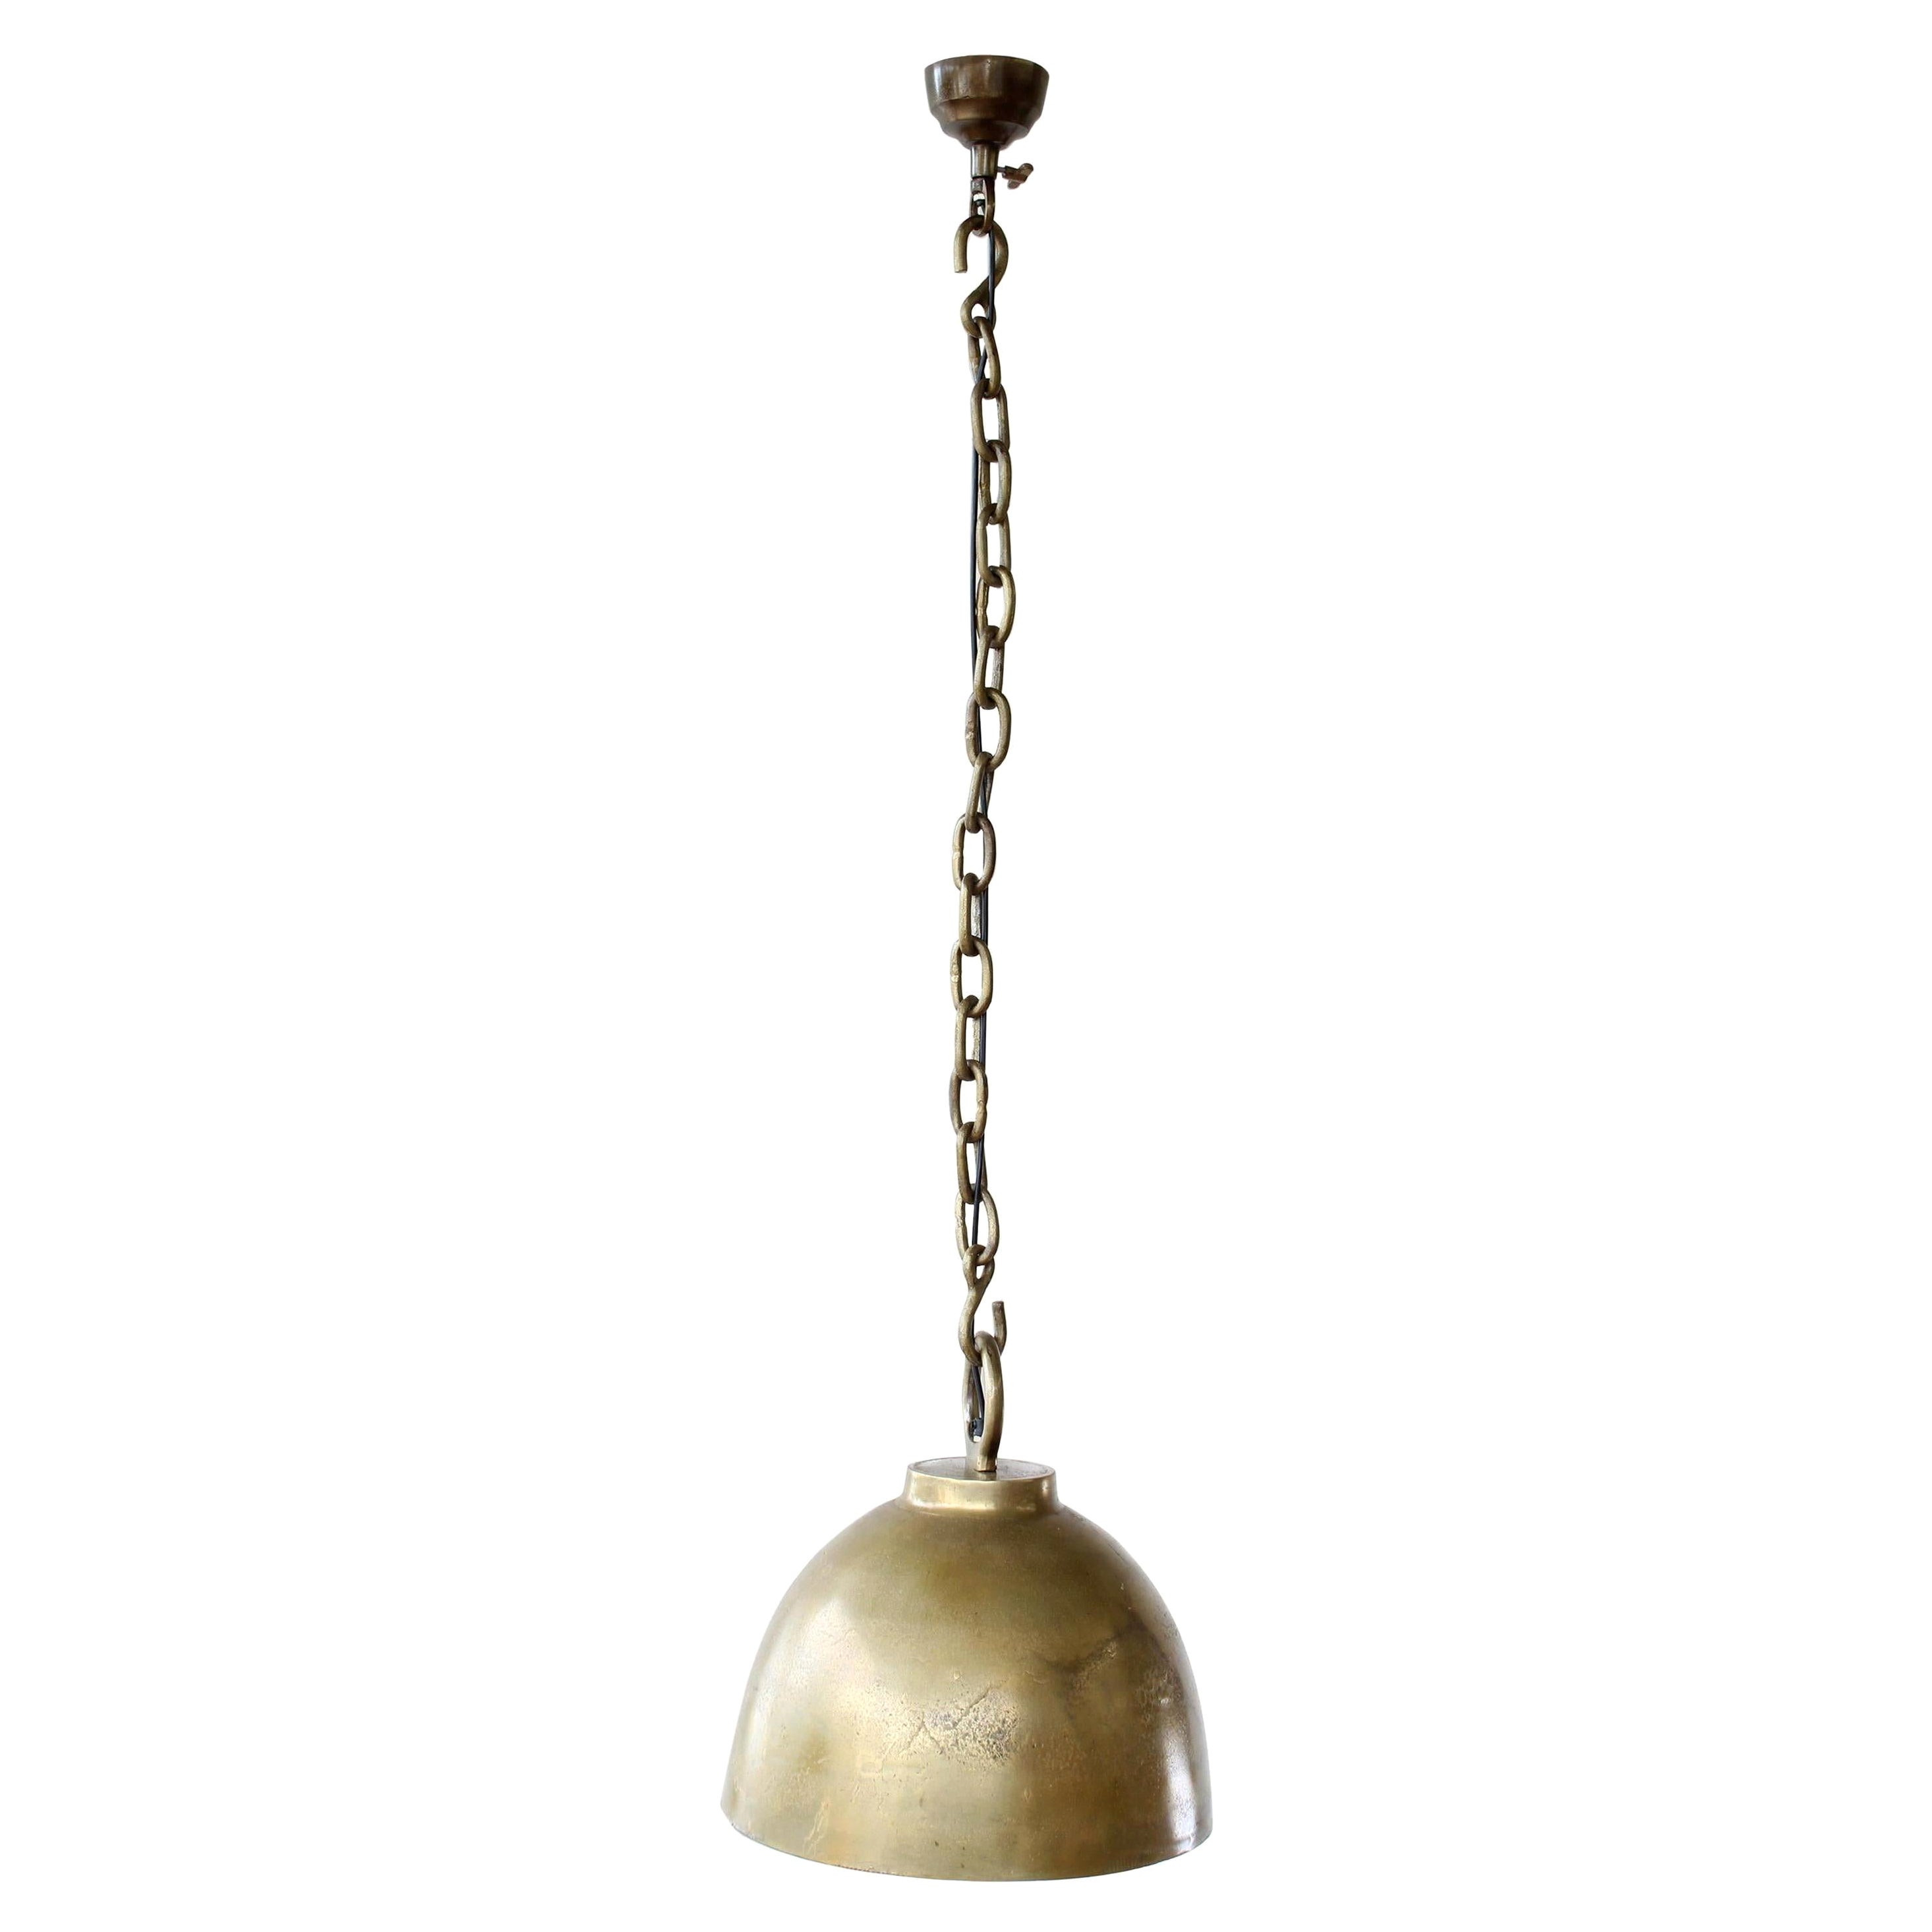 Set of Large French Hanging Pendant Lights in Brass, Multiples Available